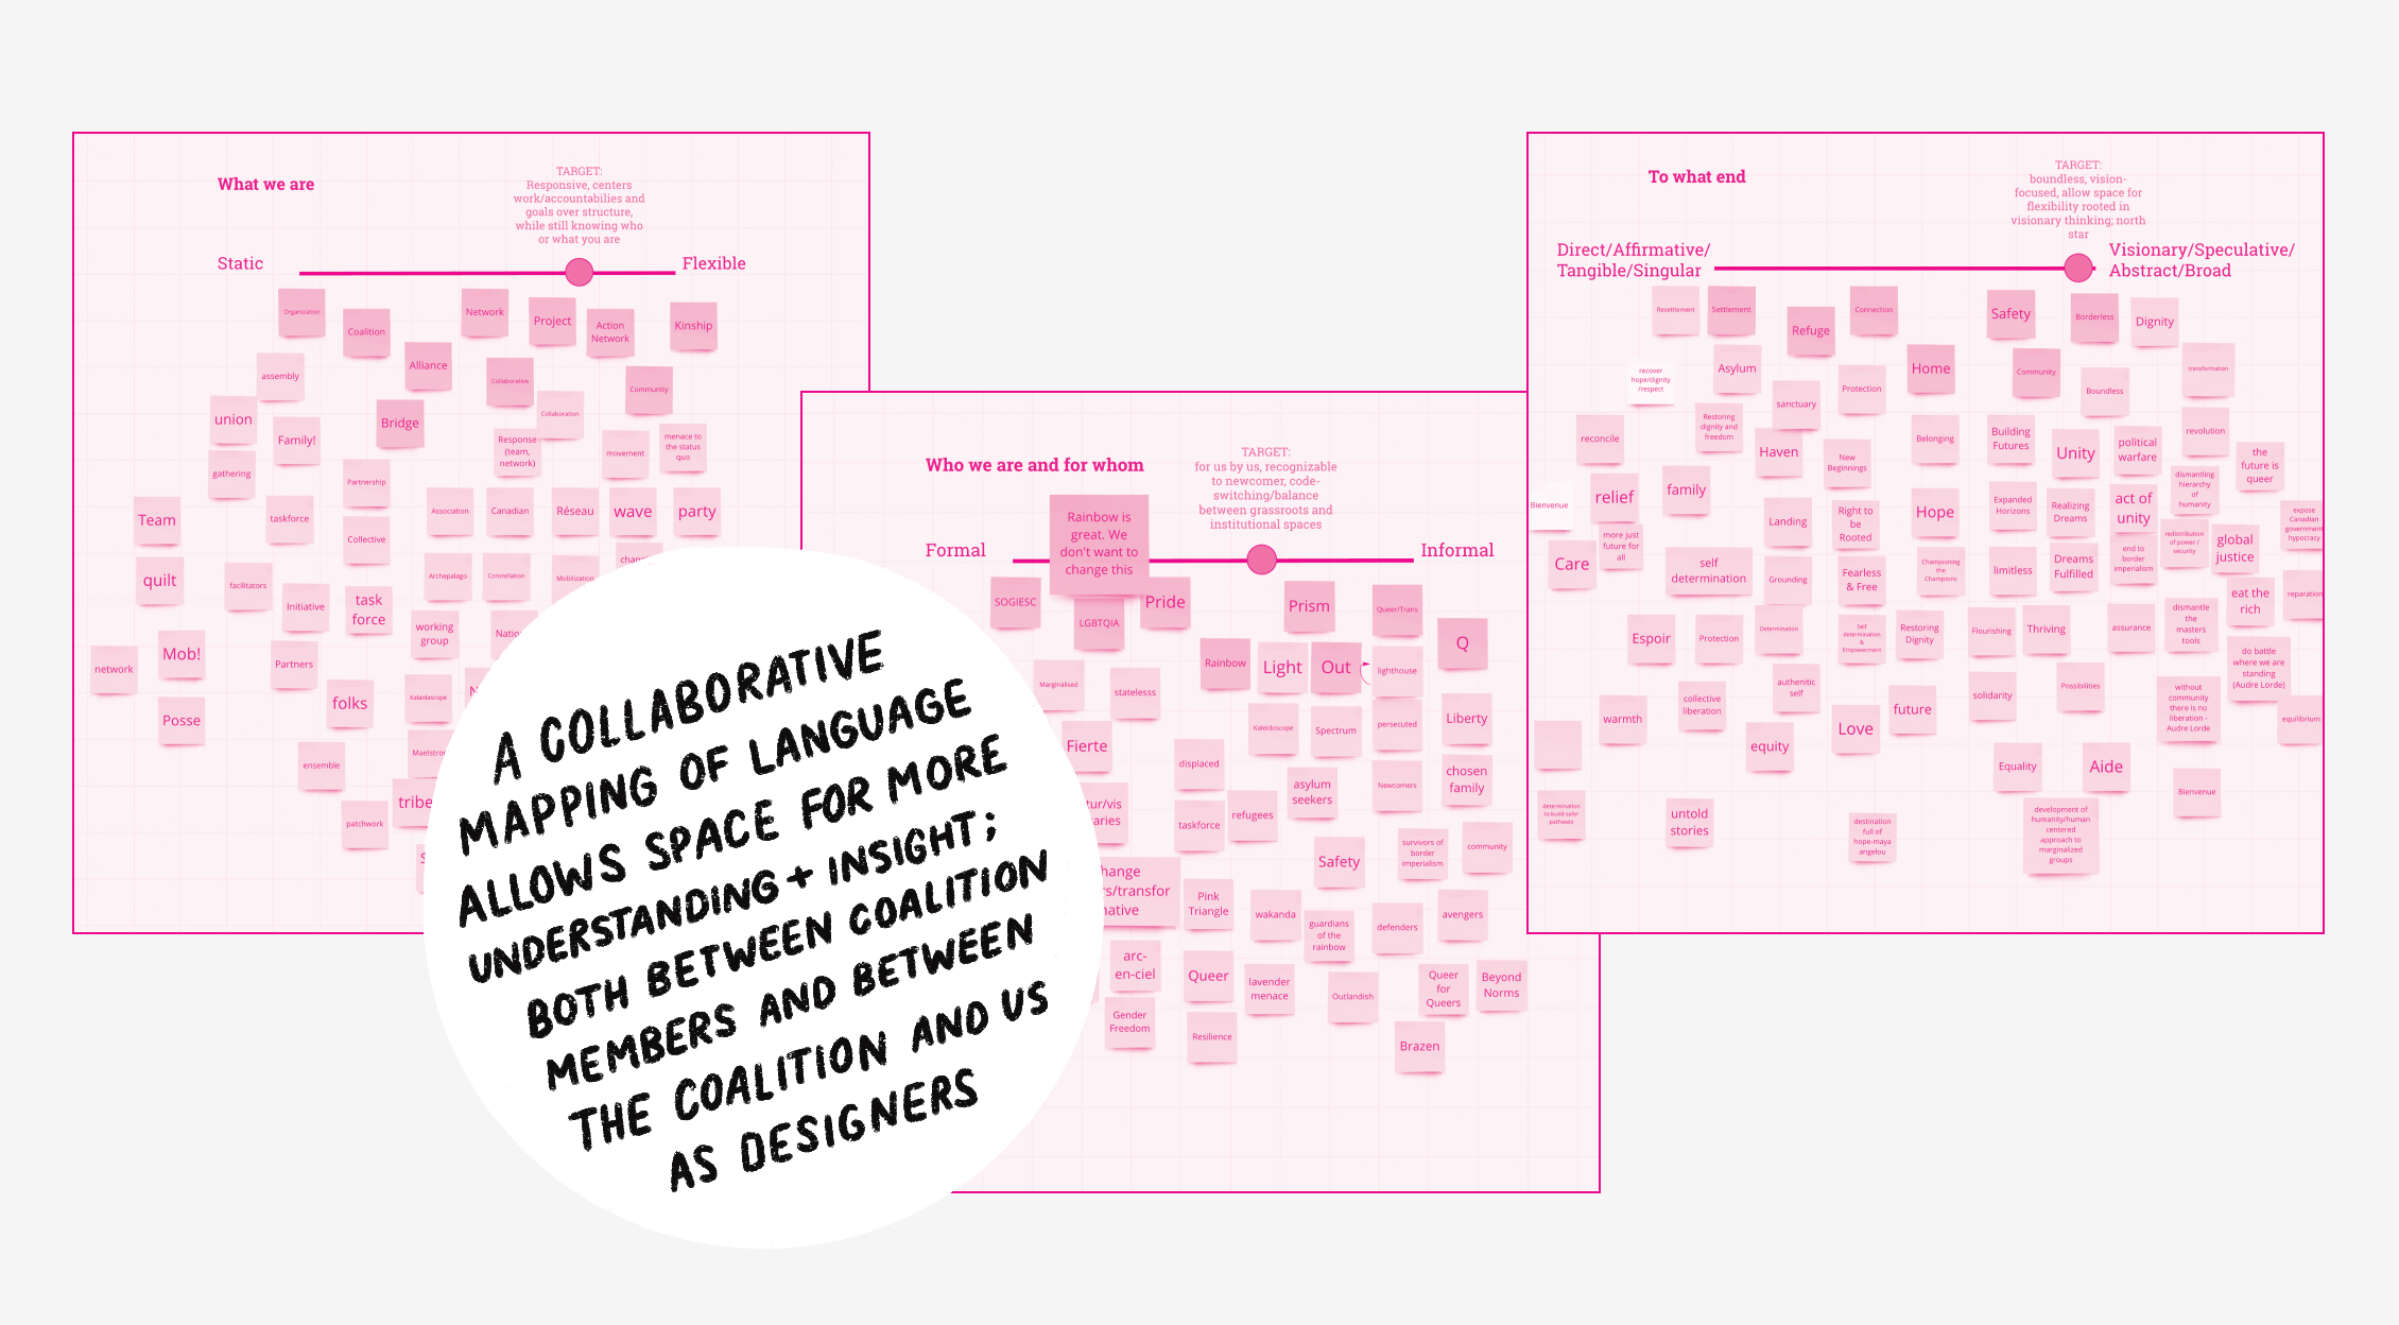 Three adjacent pink charts feature assorted sticky notes arranged in columns under headings such as "What we are," "Who we are and for whom we create," and "Visionary Speculative/Activist." A white overlay text reads, "A collaborative mapping of language allows space for more understanding & insight between coalition members and us as designers.